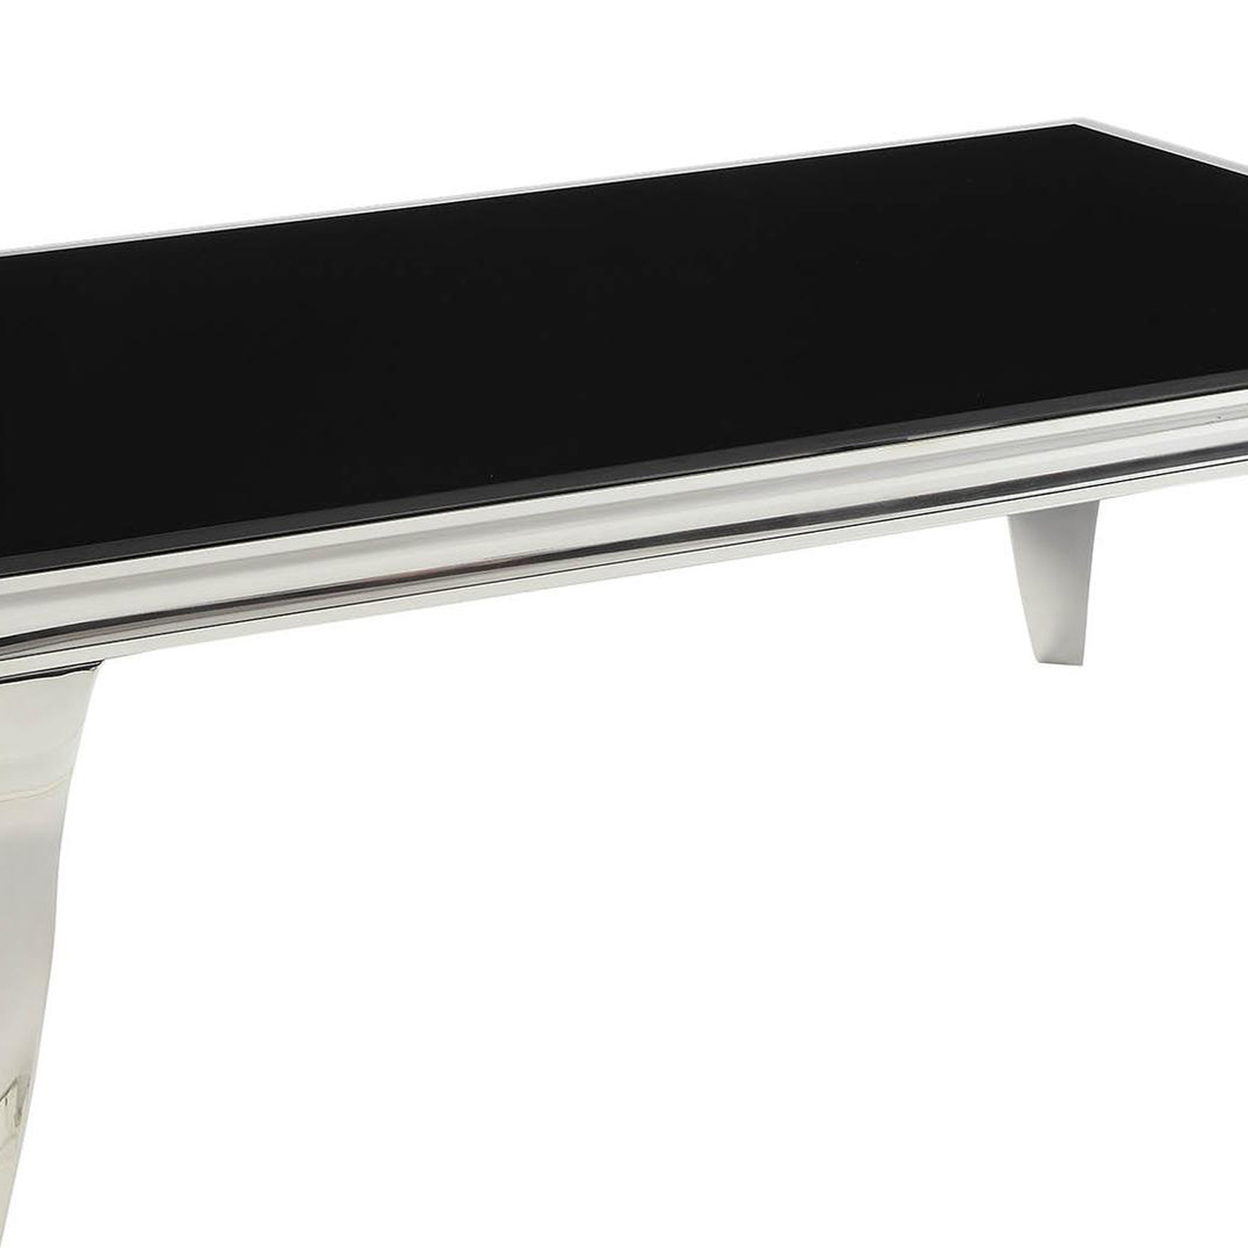 Modern Metal Frame Coffee Table With Beveled Glass Top, Black And Silver- Saltoro Sherpi